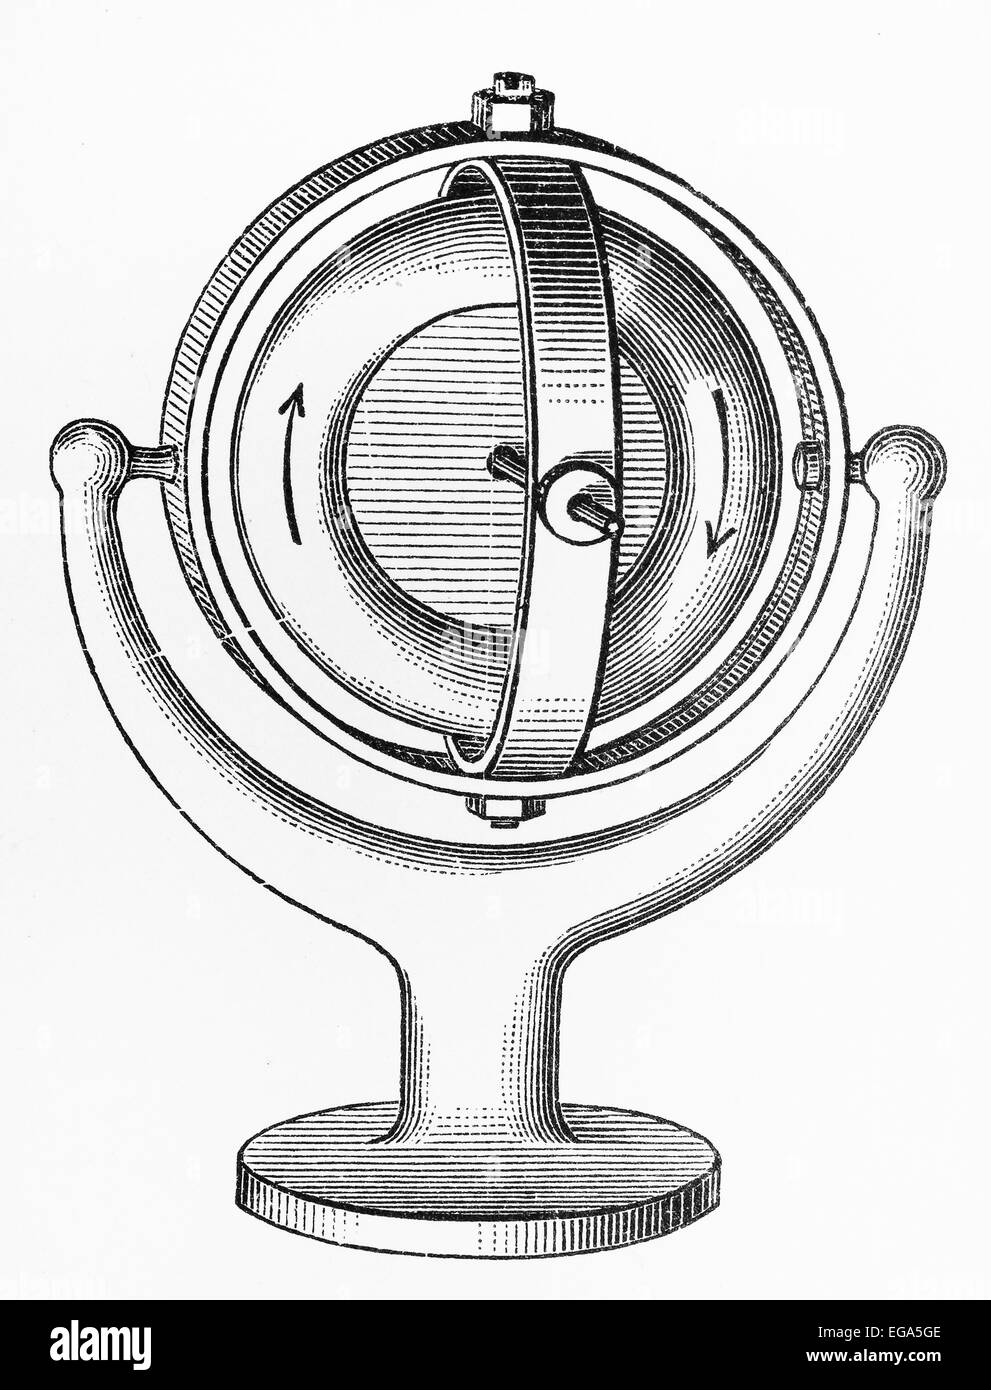 Vintage torpedo gyroscope from the beginning of 20th century Stock Photo